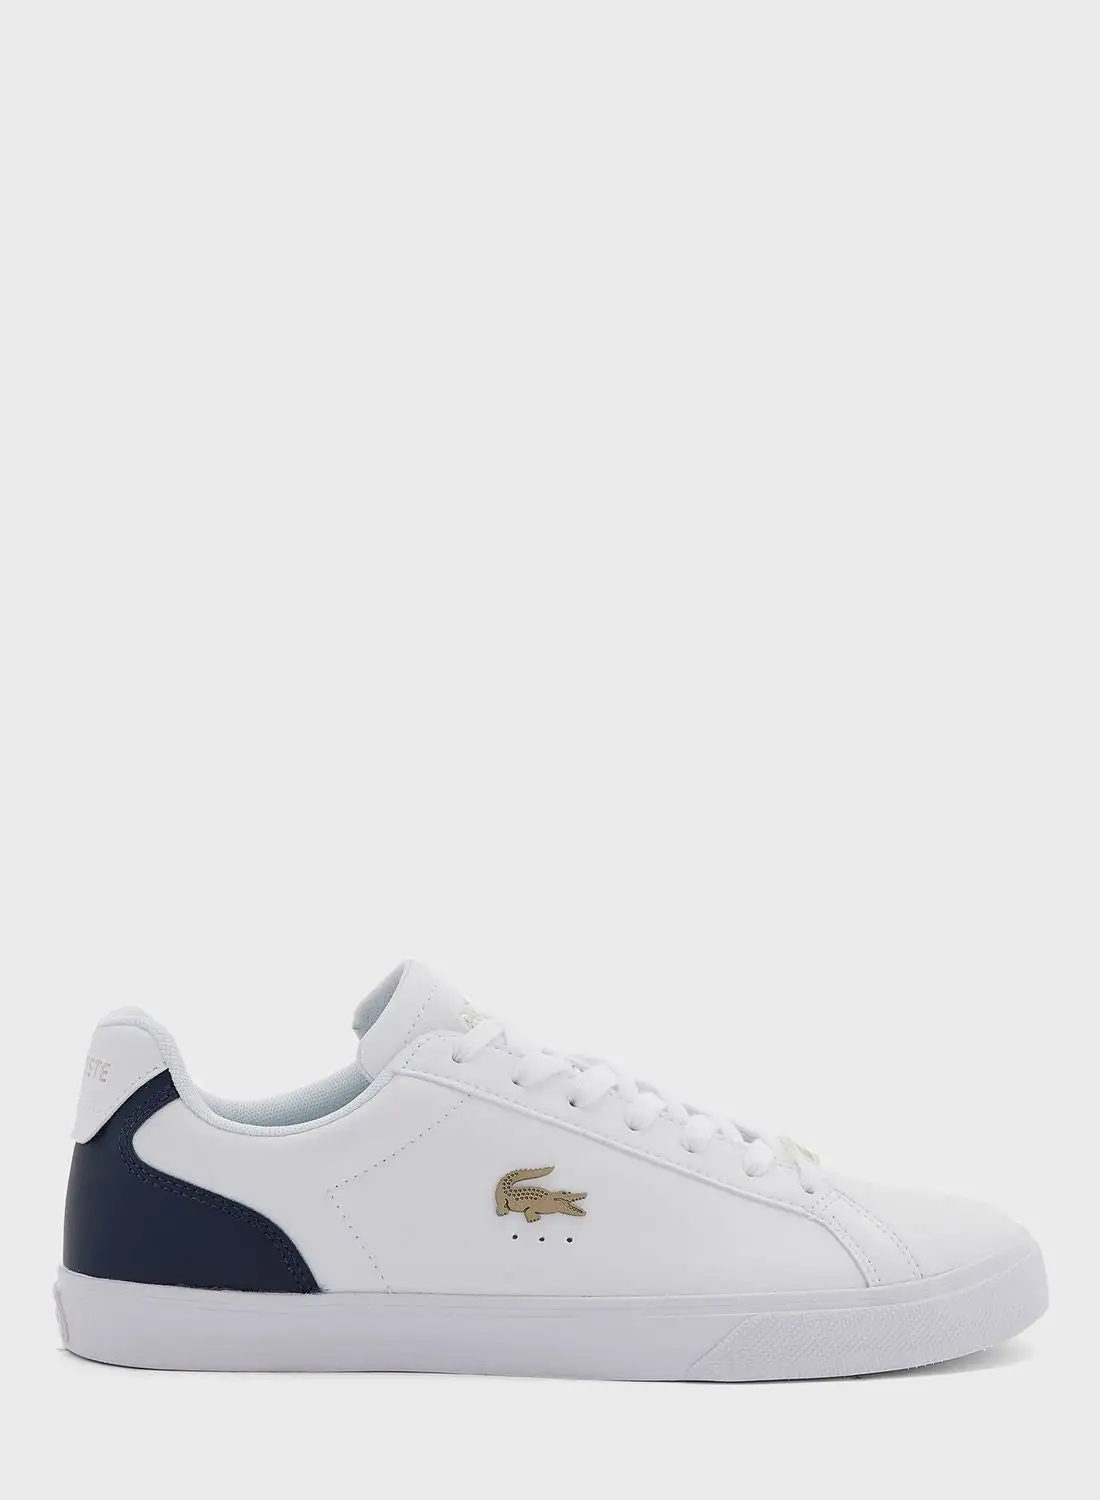 LACOSTE Casual Lace Up Sneakers